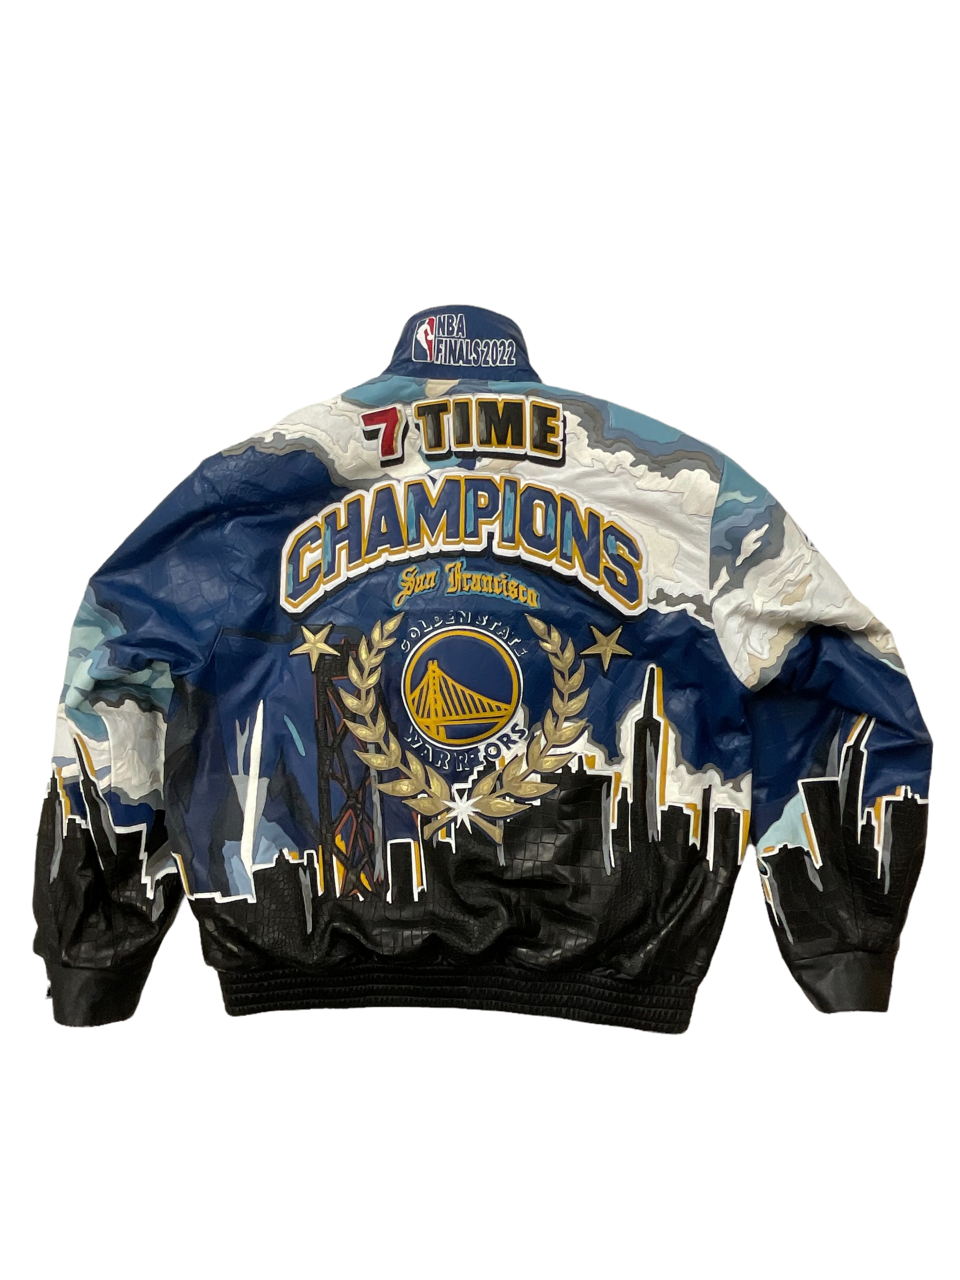 GOLDEN STATE WARRIORS WOOL & LEATHER PLAYOFFS LEATHER JACKET Yellow – Jeff  Hamilton Shop